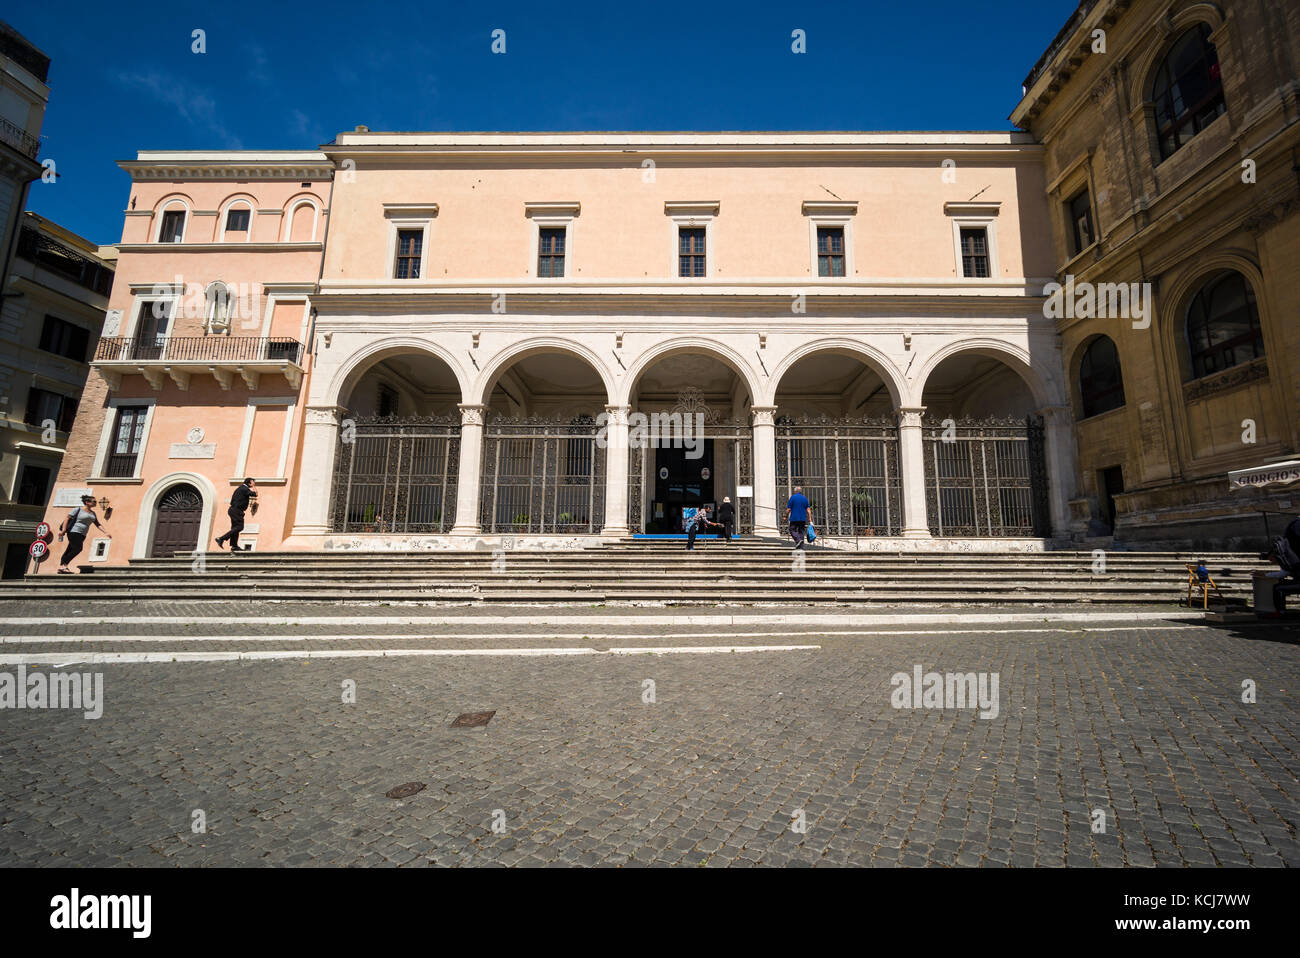 Rome. Italy. Exterior of the Basilica di San Pietro in Vincoli (Church of Saint Peter in Chains), Piazza di San Pietro in Vincoli. Stock Photo